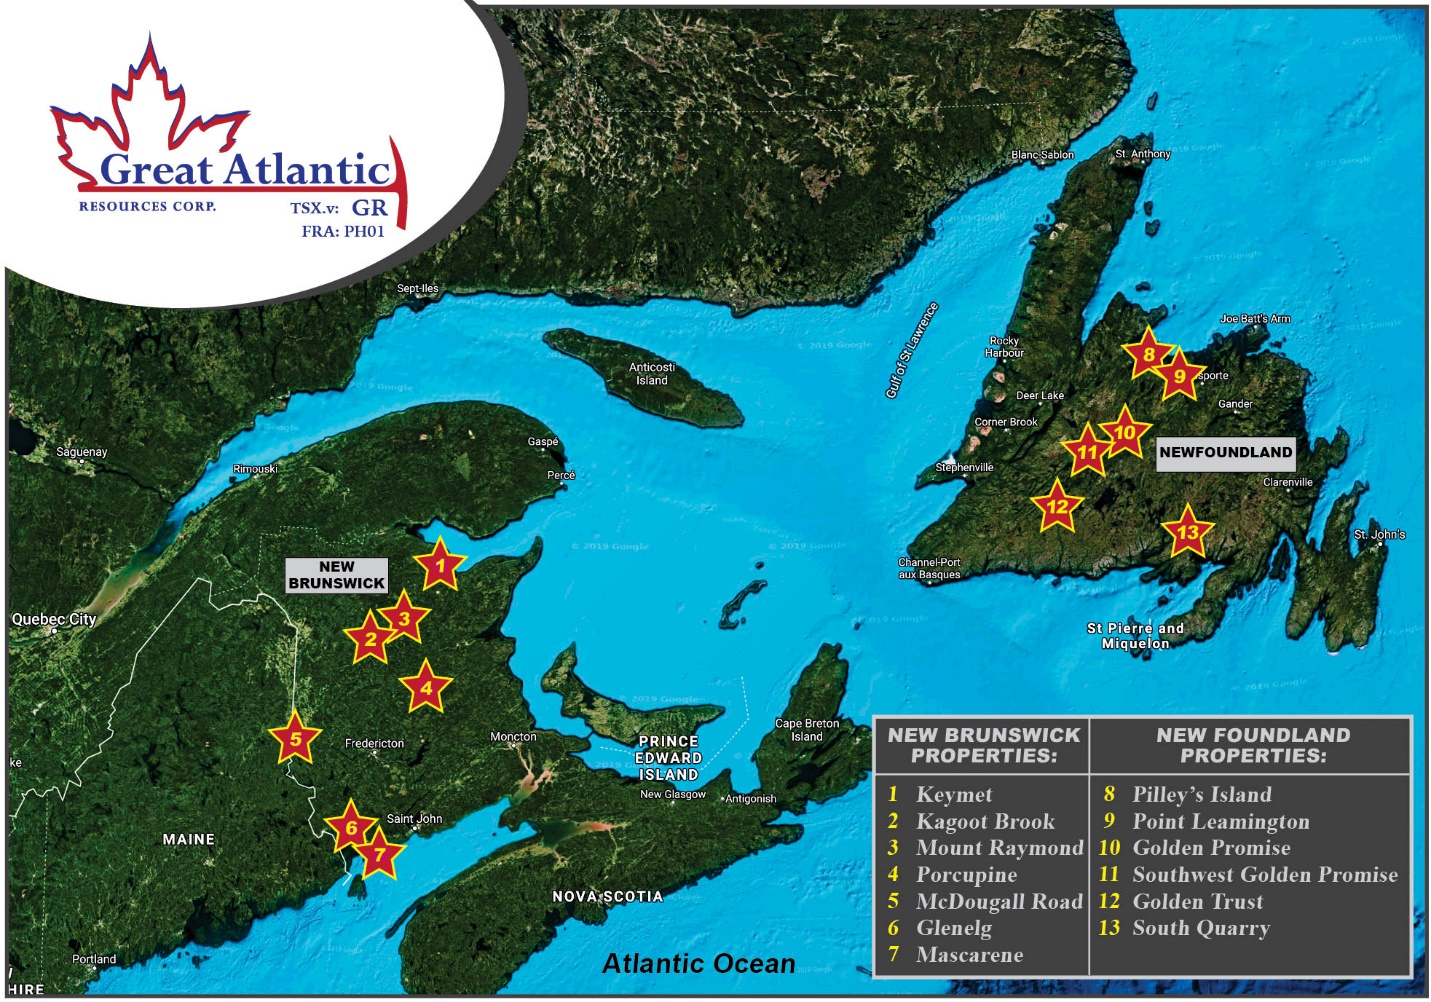 Great Atlantic Resources Corp., Tuesday, October 20, 2020, Press release picture